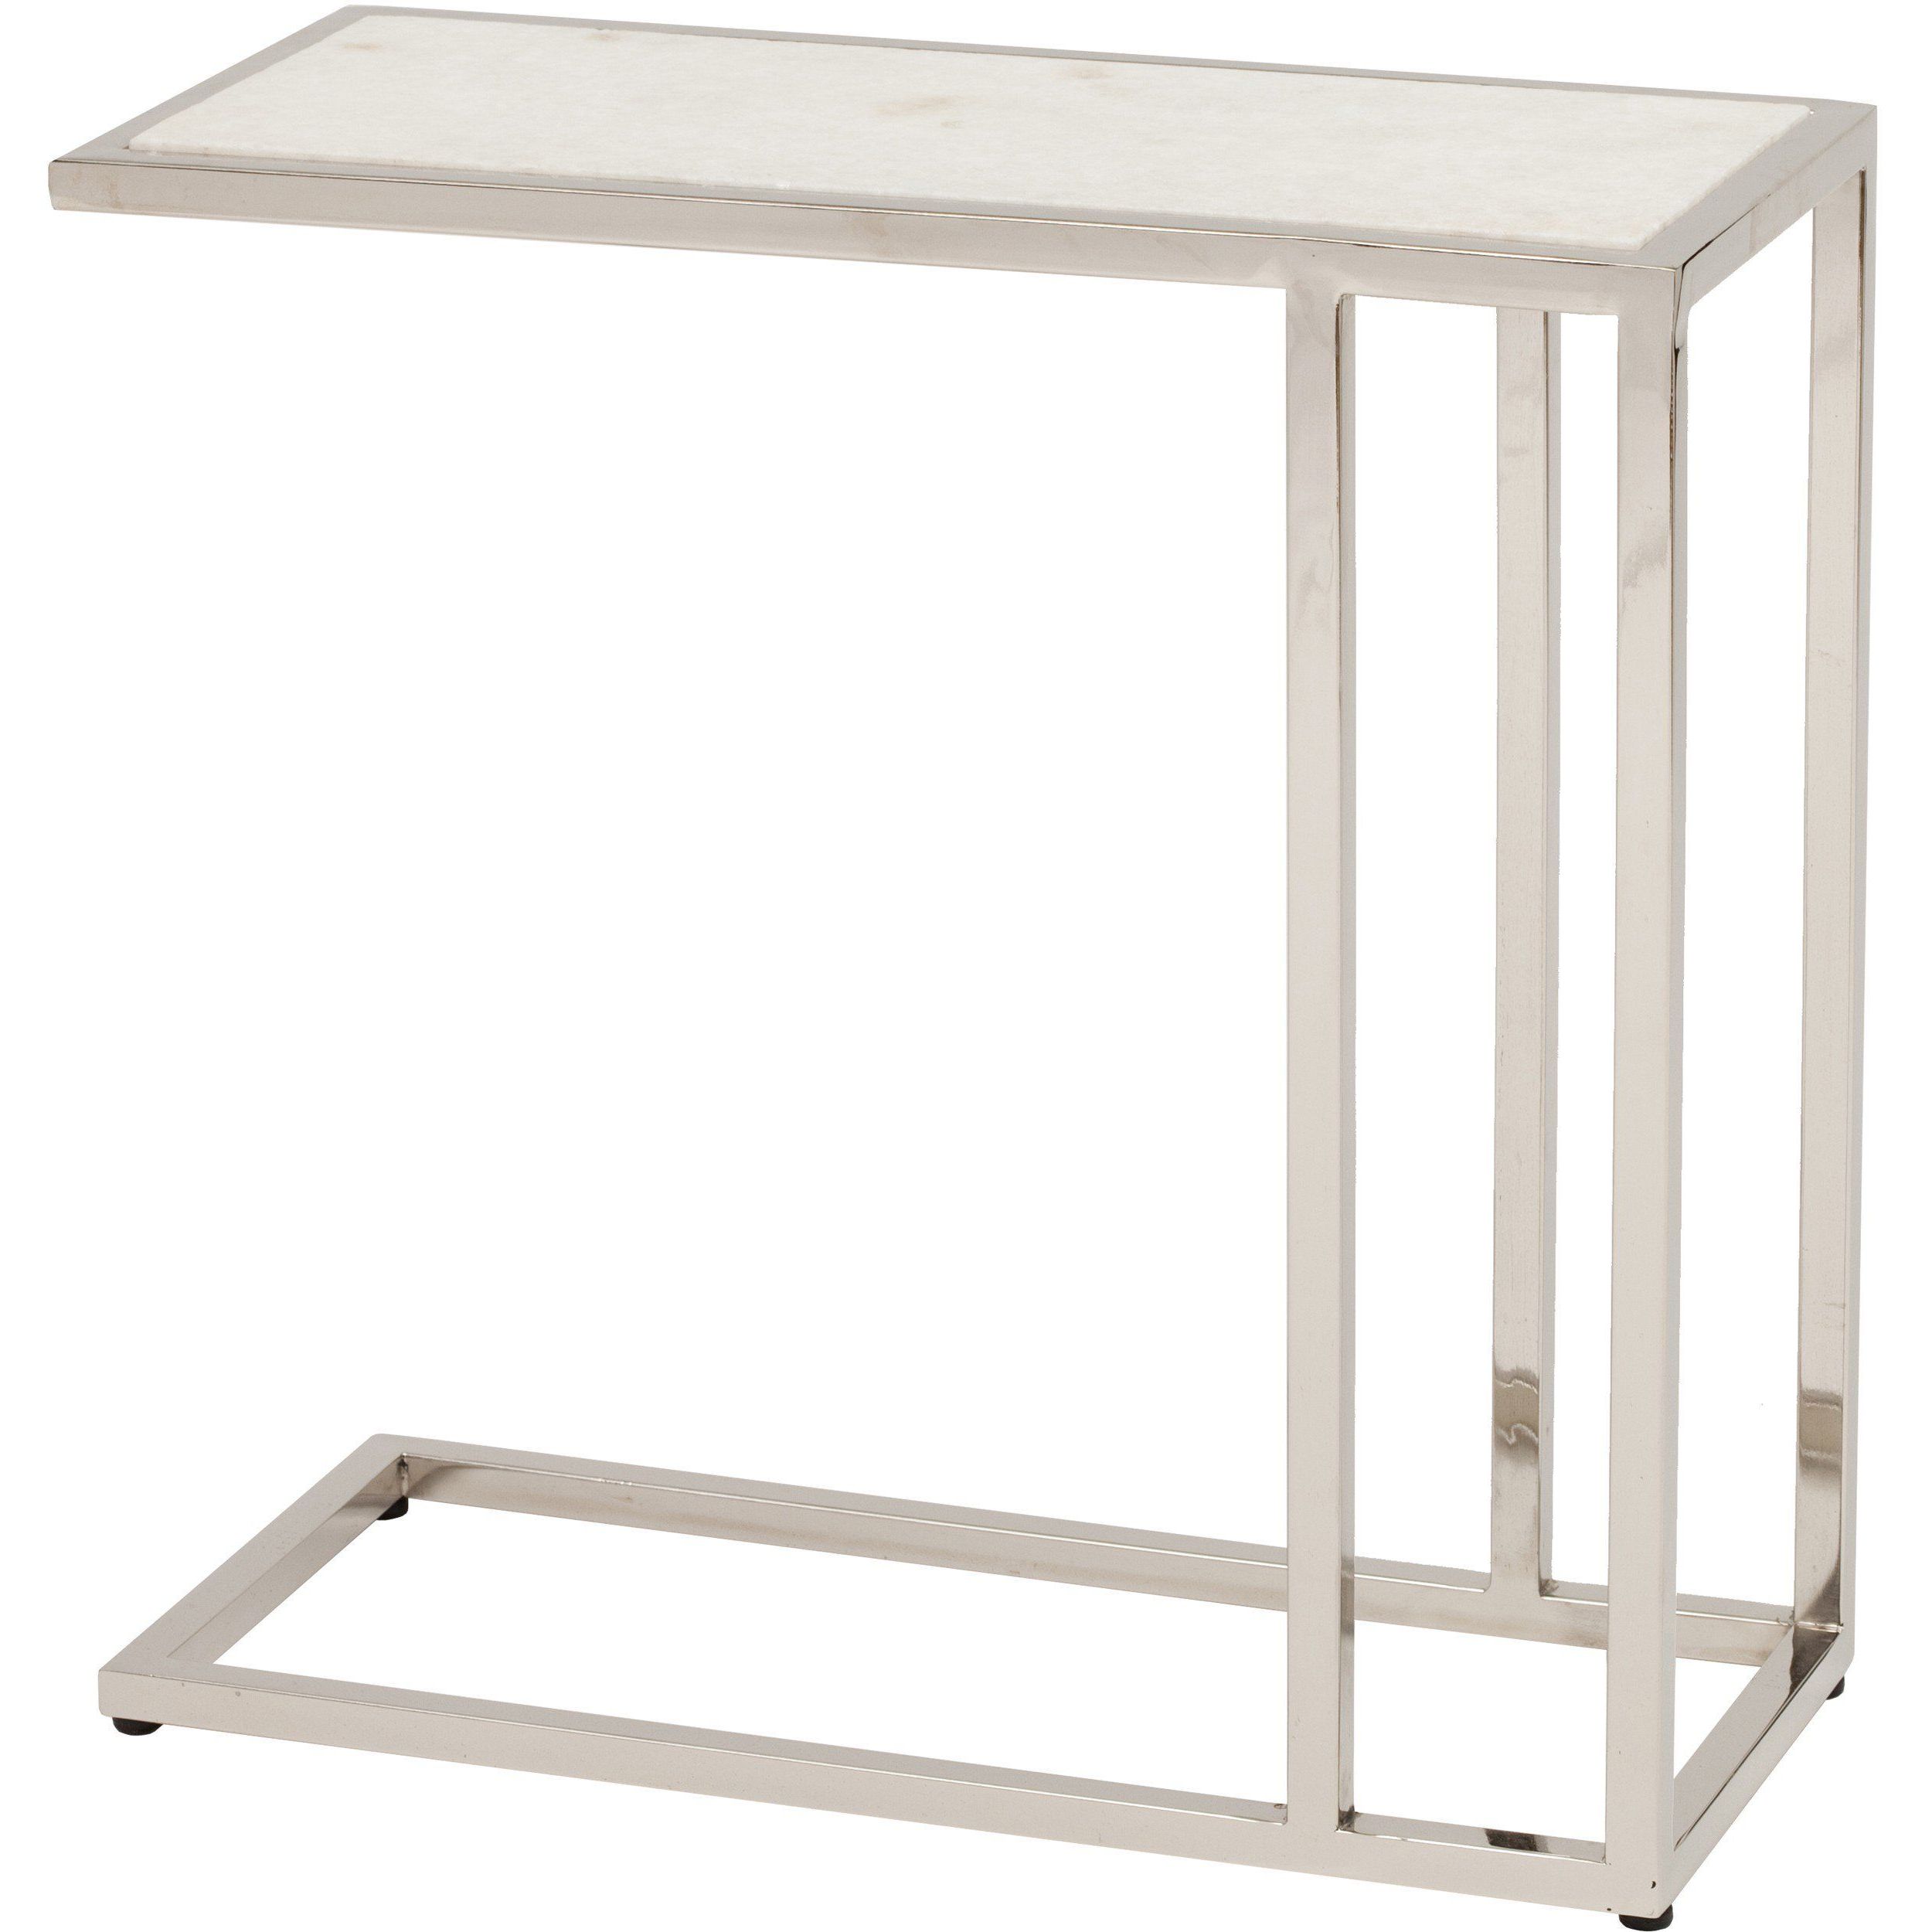 Echelon Sofa Hugger End Table | Eclectic Modern, Contemporary In Echelon Console Tables (View 11 of 20)